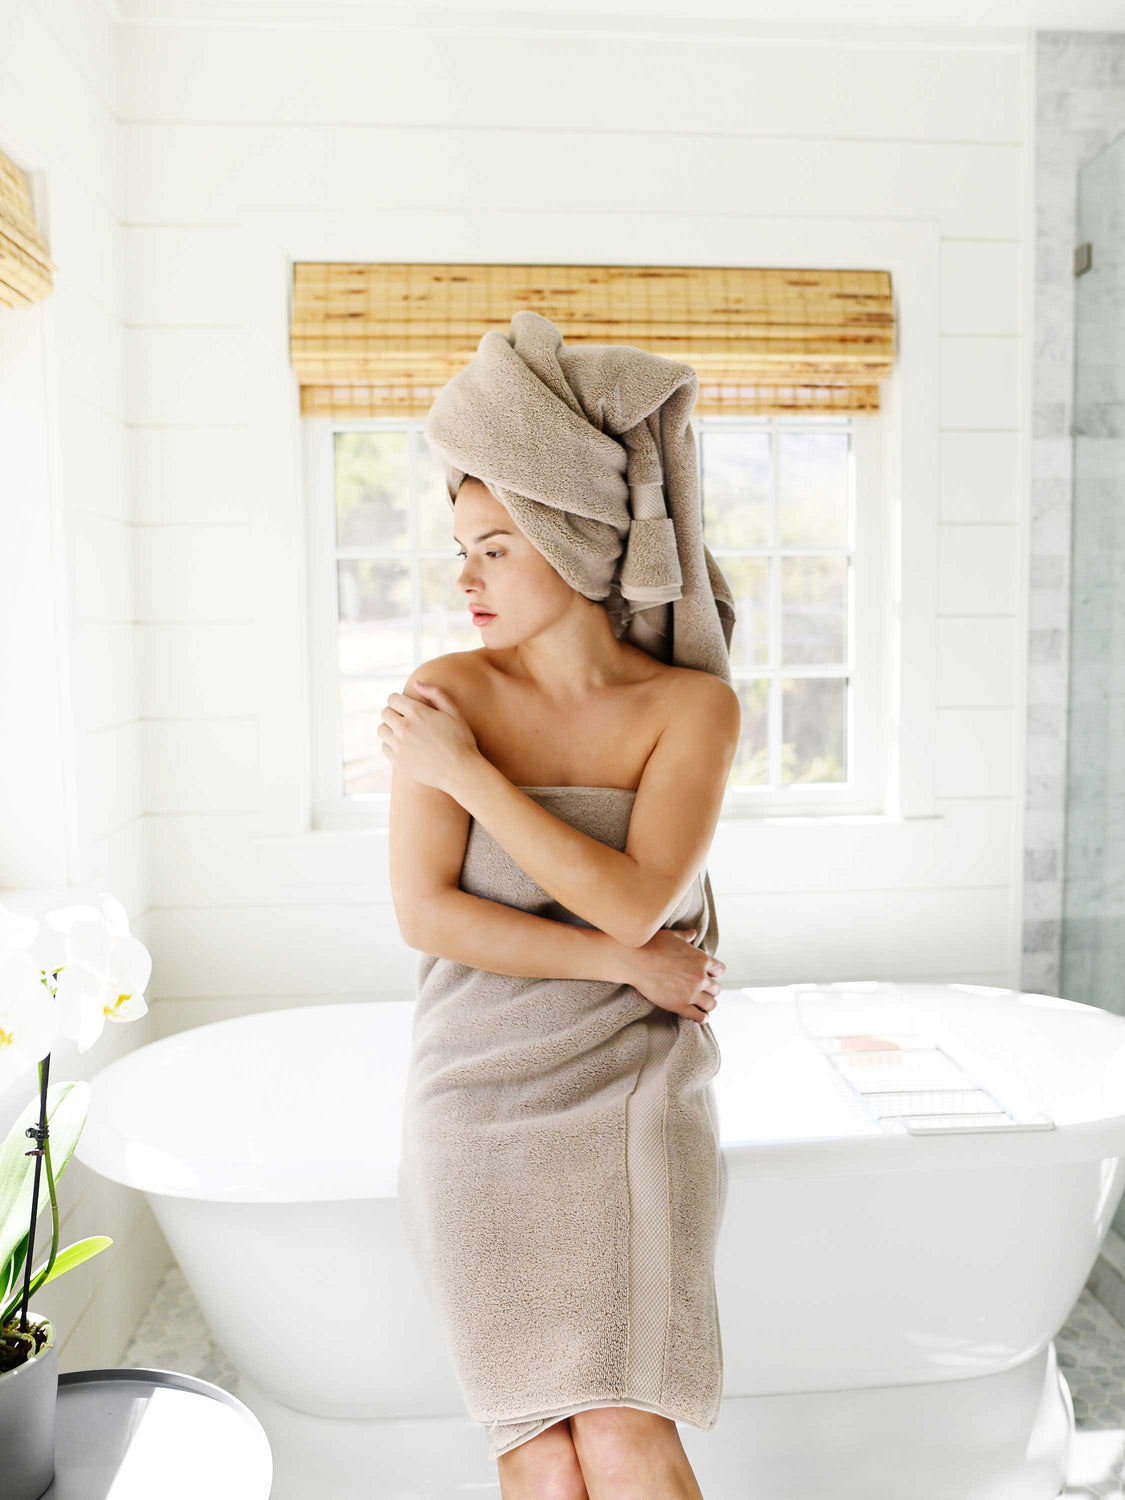 A woman sitting in the edge of a bathtub wrapped in a tan colored cotton bath towel.